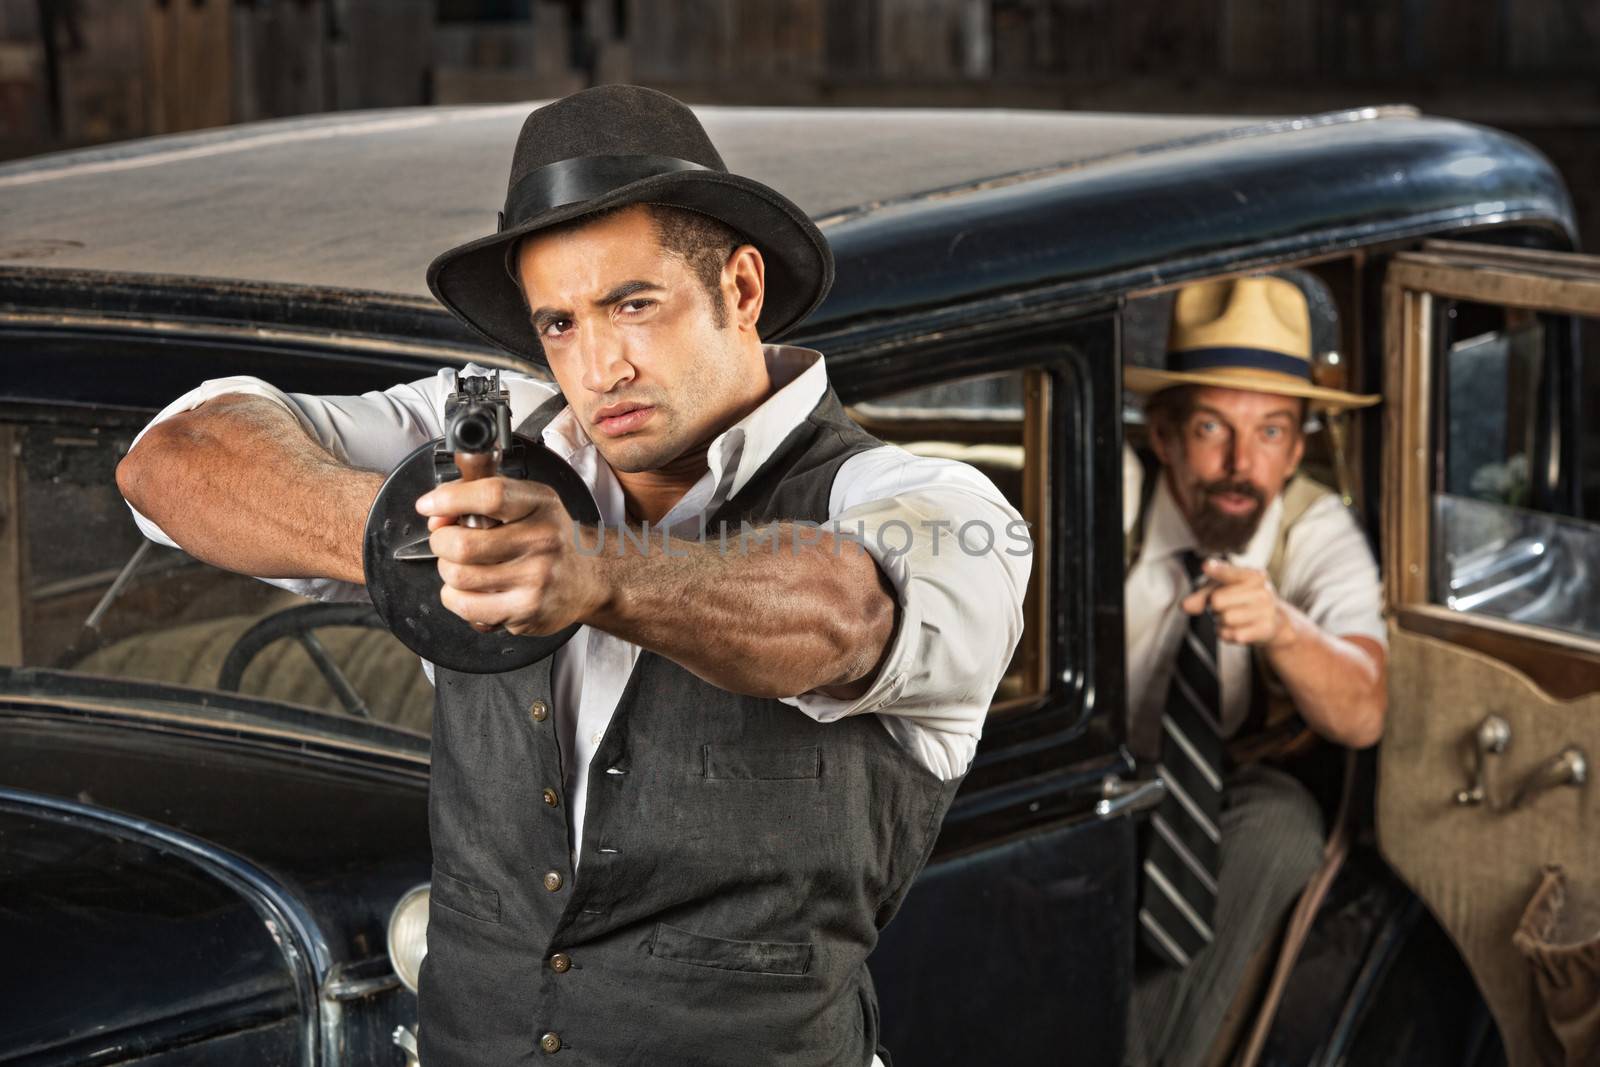 1920s Era Gangsters with Guns and Car by Creatista